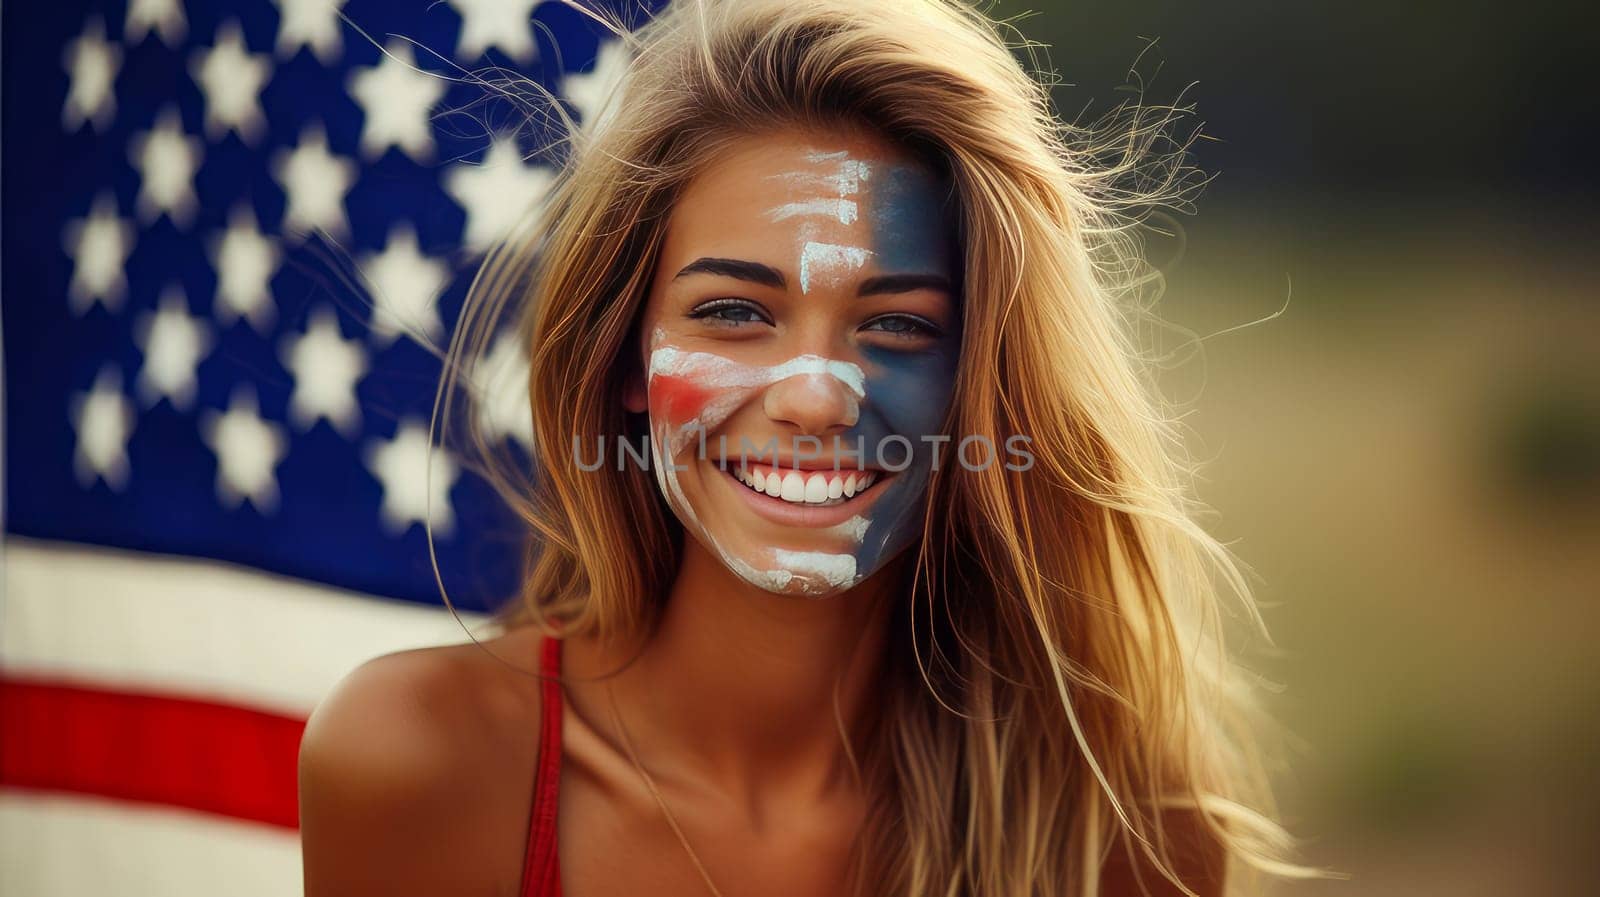 A smiling girl with her face painted in the colors of the flag of the United States of America. by Alla_Yurtayeva